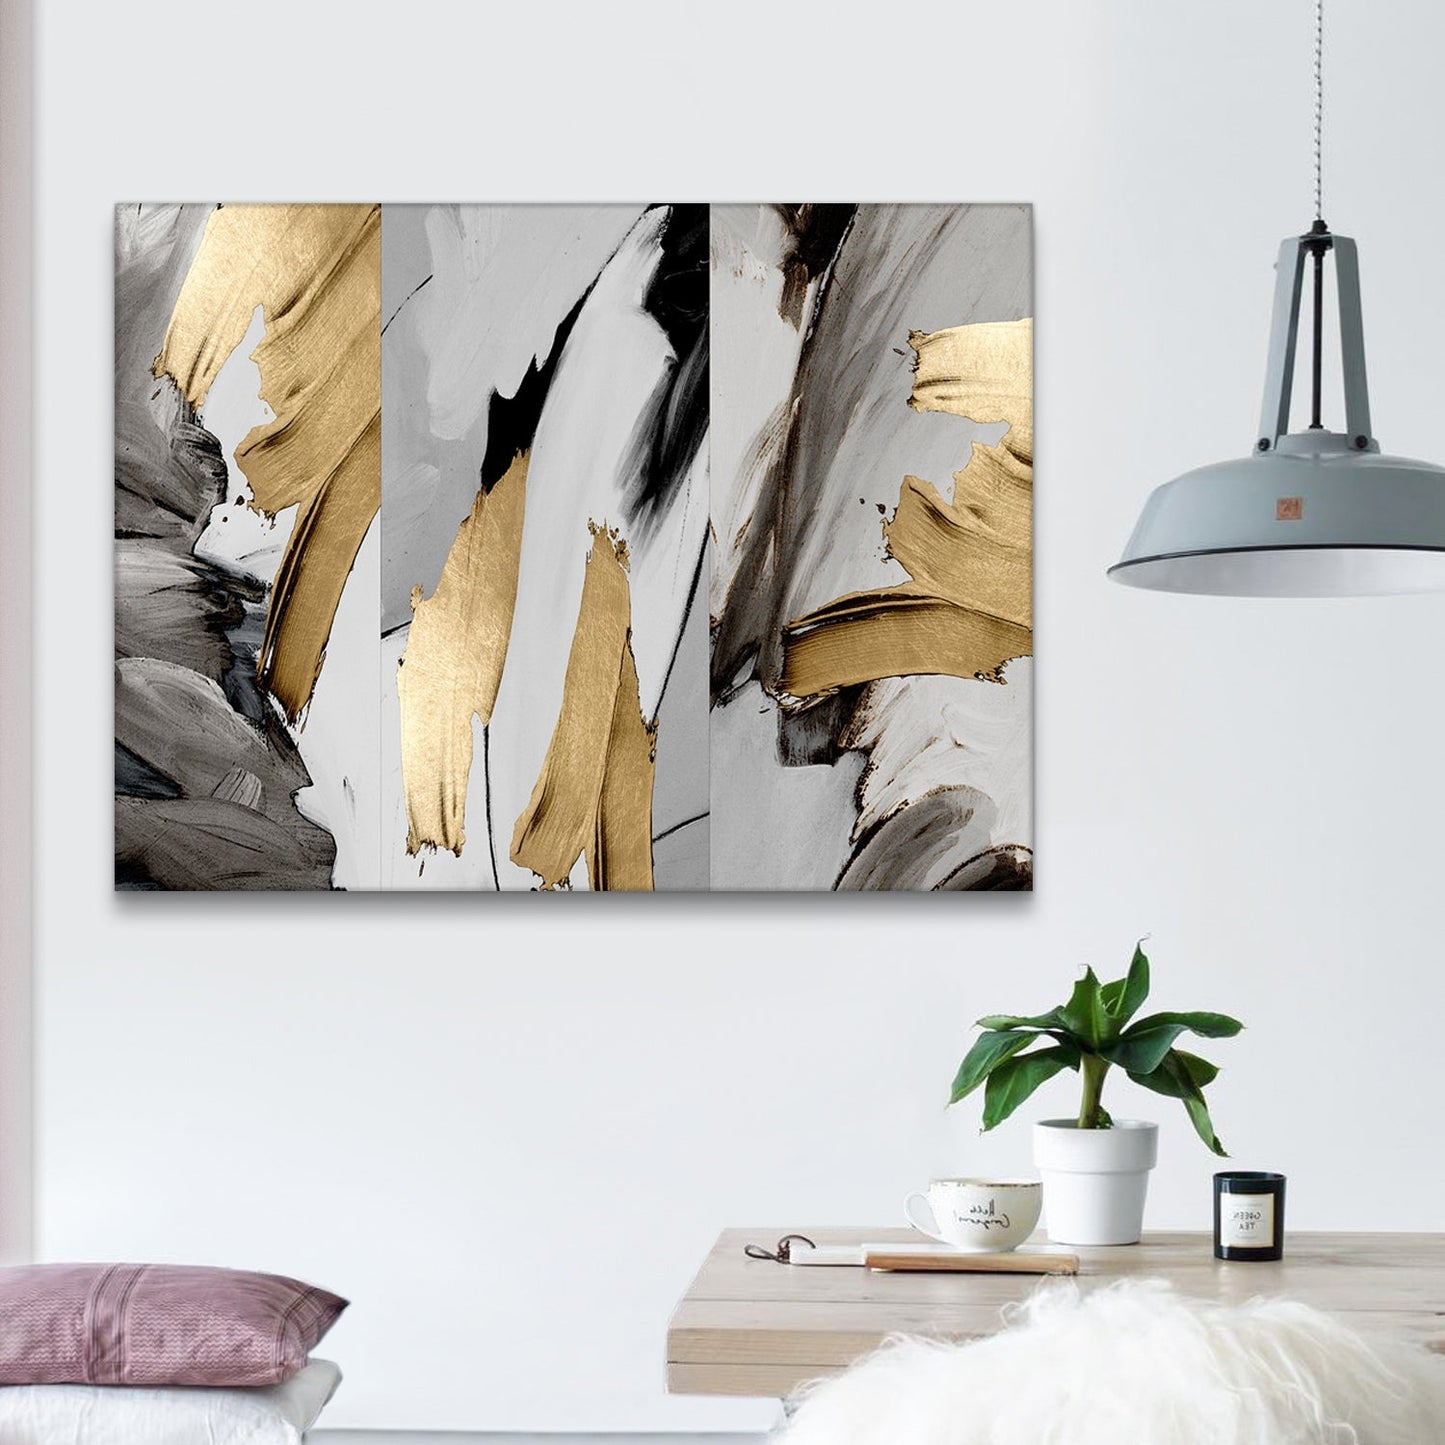 Framed Canvas Wall Art Decor Abstract Style Painting, Gold and Silver Color Painting Decoration For Office Living Room, Bedroom Decor-Ready To Hang